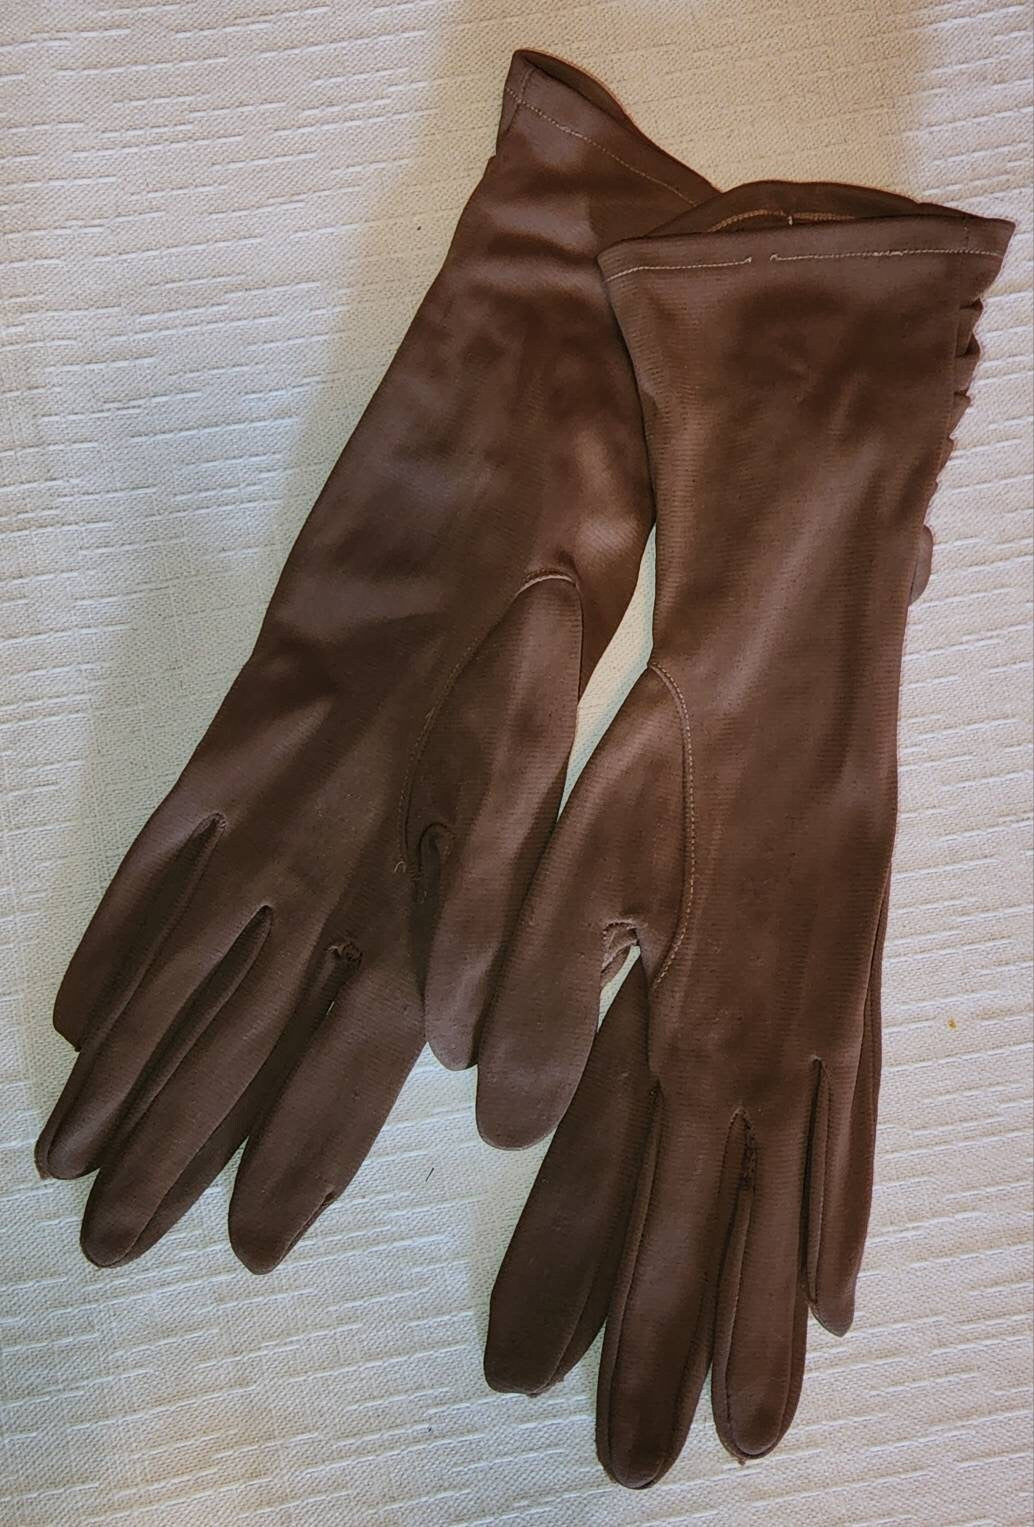 Vintage Brown Gloves 1950s 60s Midlength Ruched Nylon Fabric Gloves Mid Century Rockabilly Boho